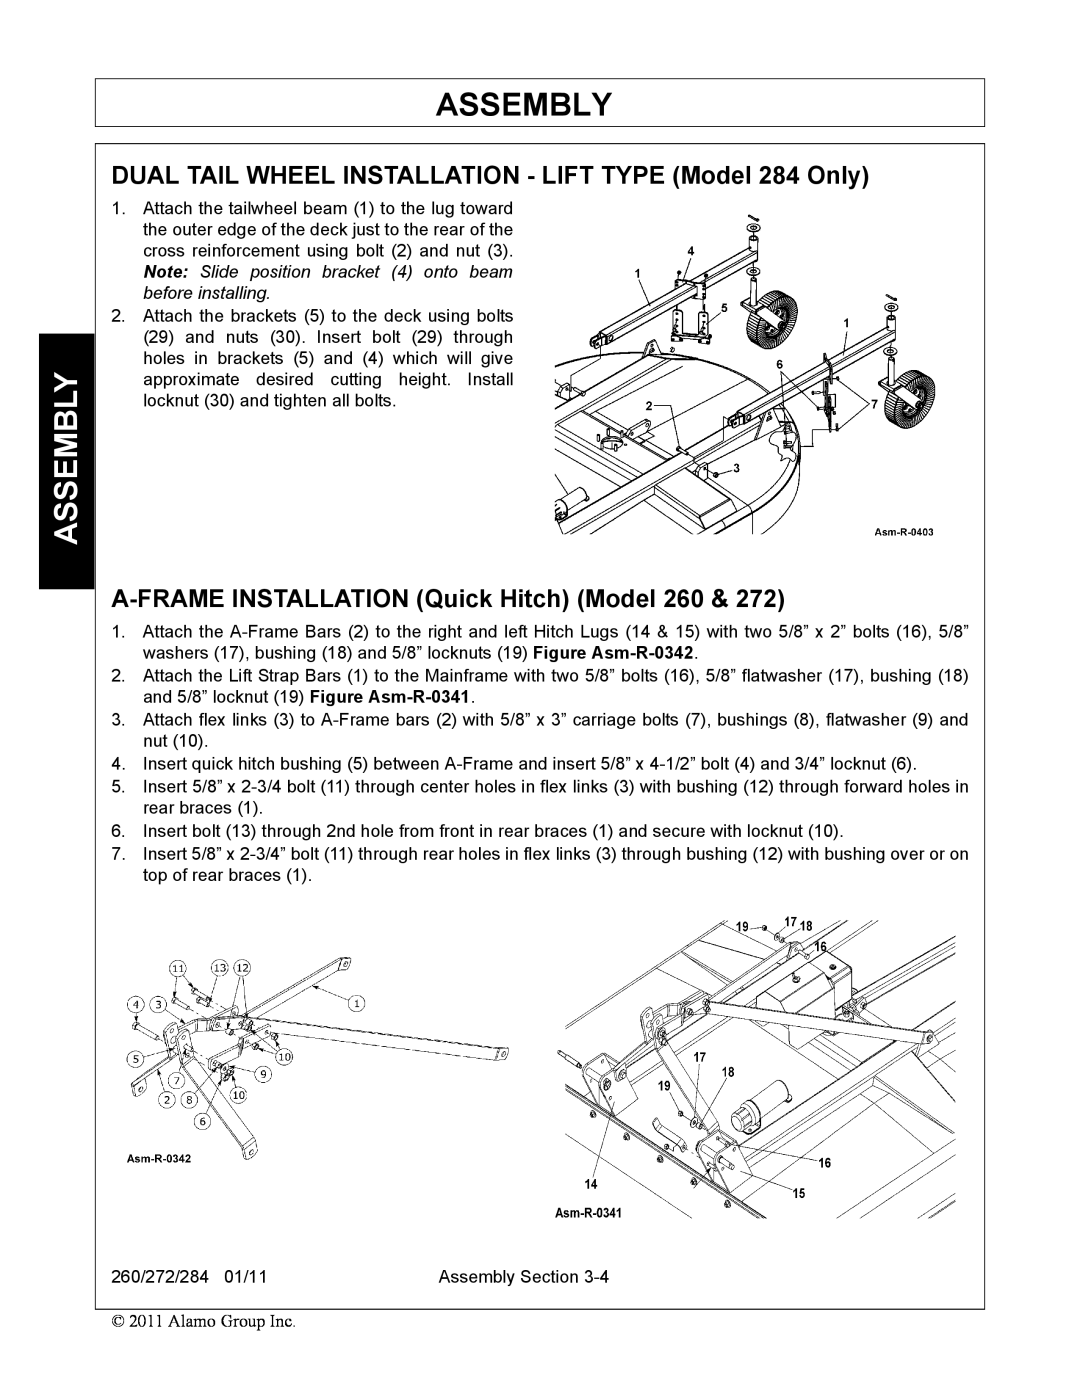 Alamo 272 DUAL TAIL WHEEL INSTALLATION - LIFT TYPE Model 284 Only, A-FRAME INSTALLATION Quick Hitch Model 260, Assembly 